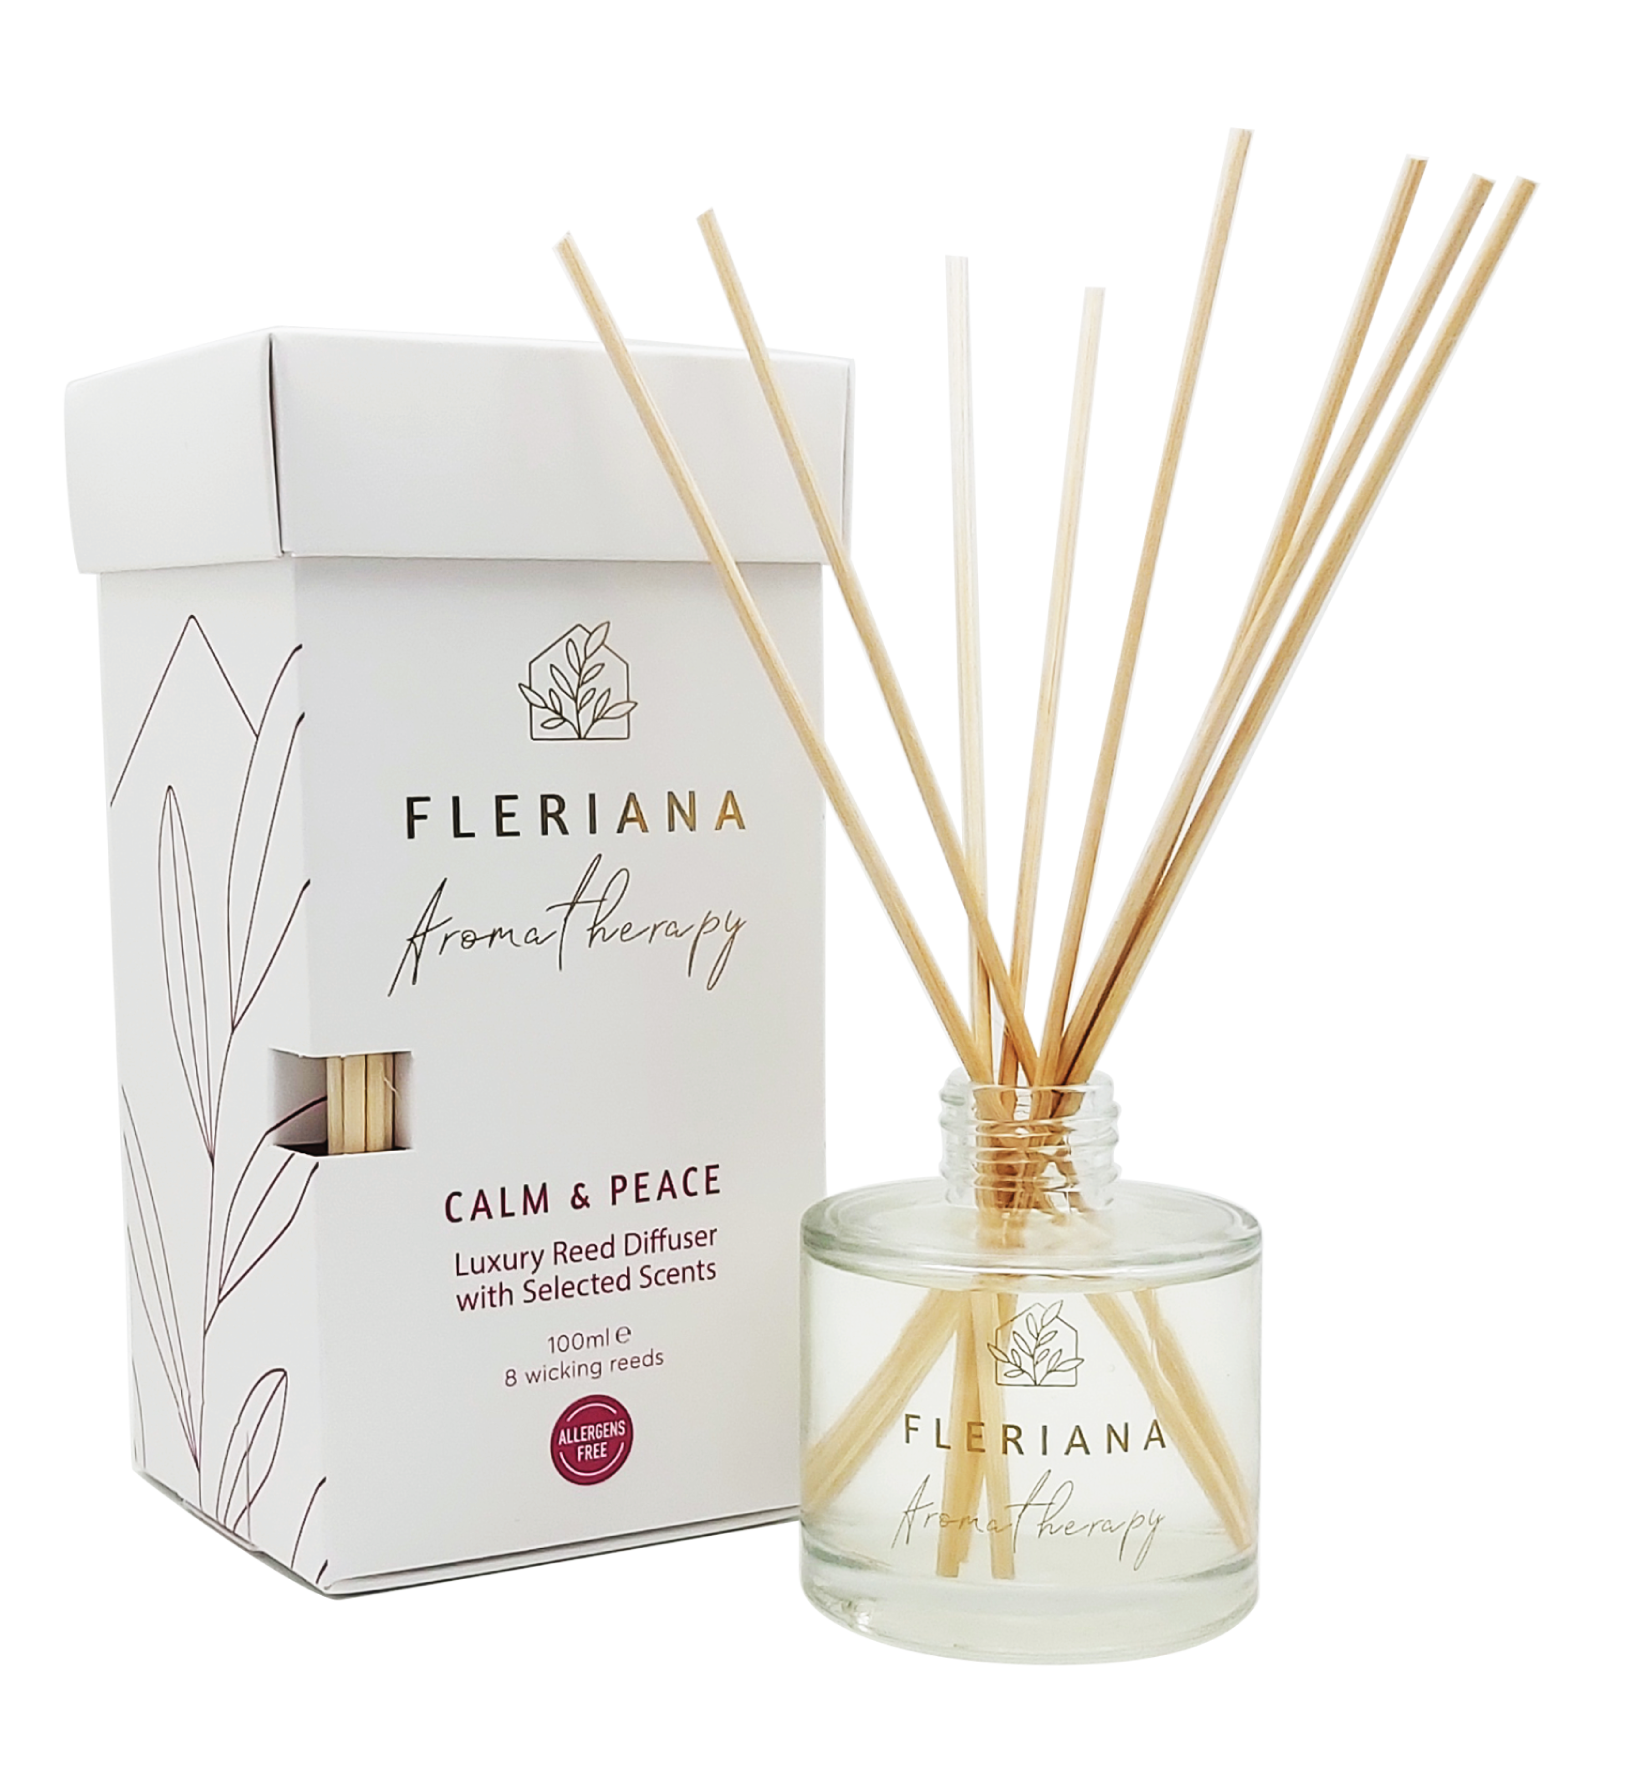 CALM & PEACE LUXURY REED DIFFUSER